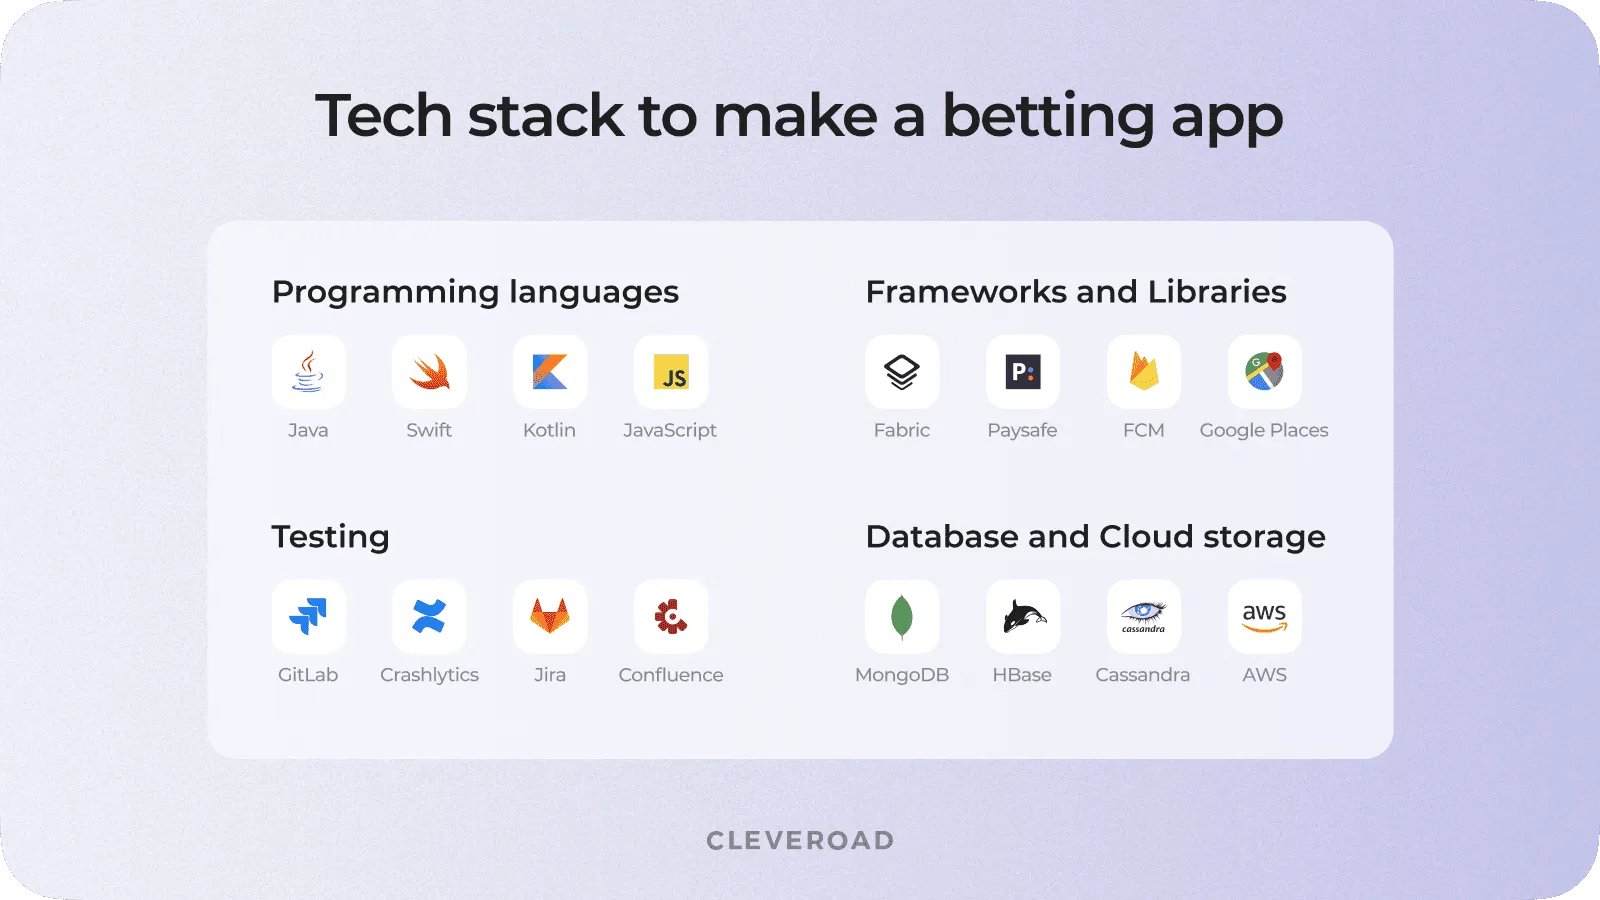 How to create a betting app: tech stack